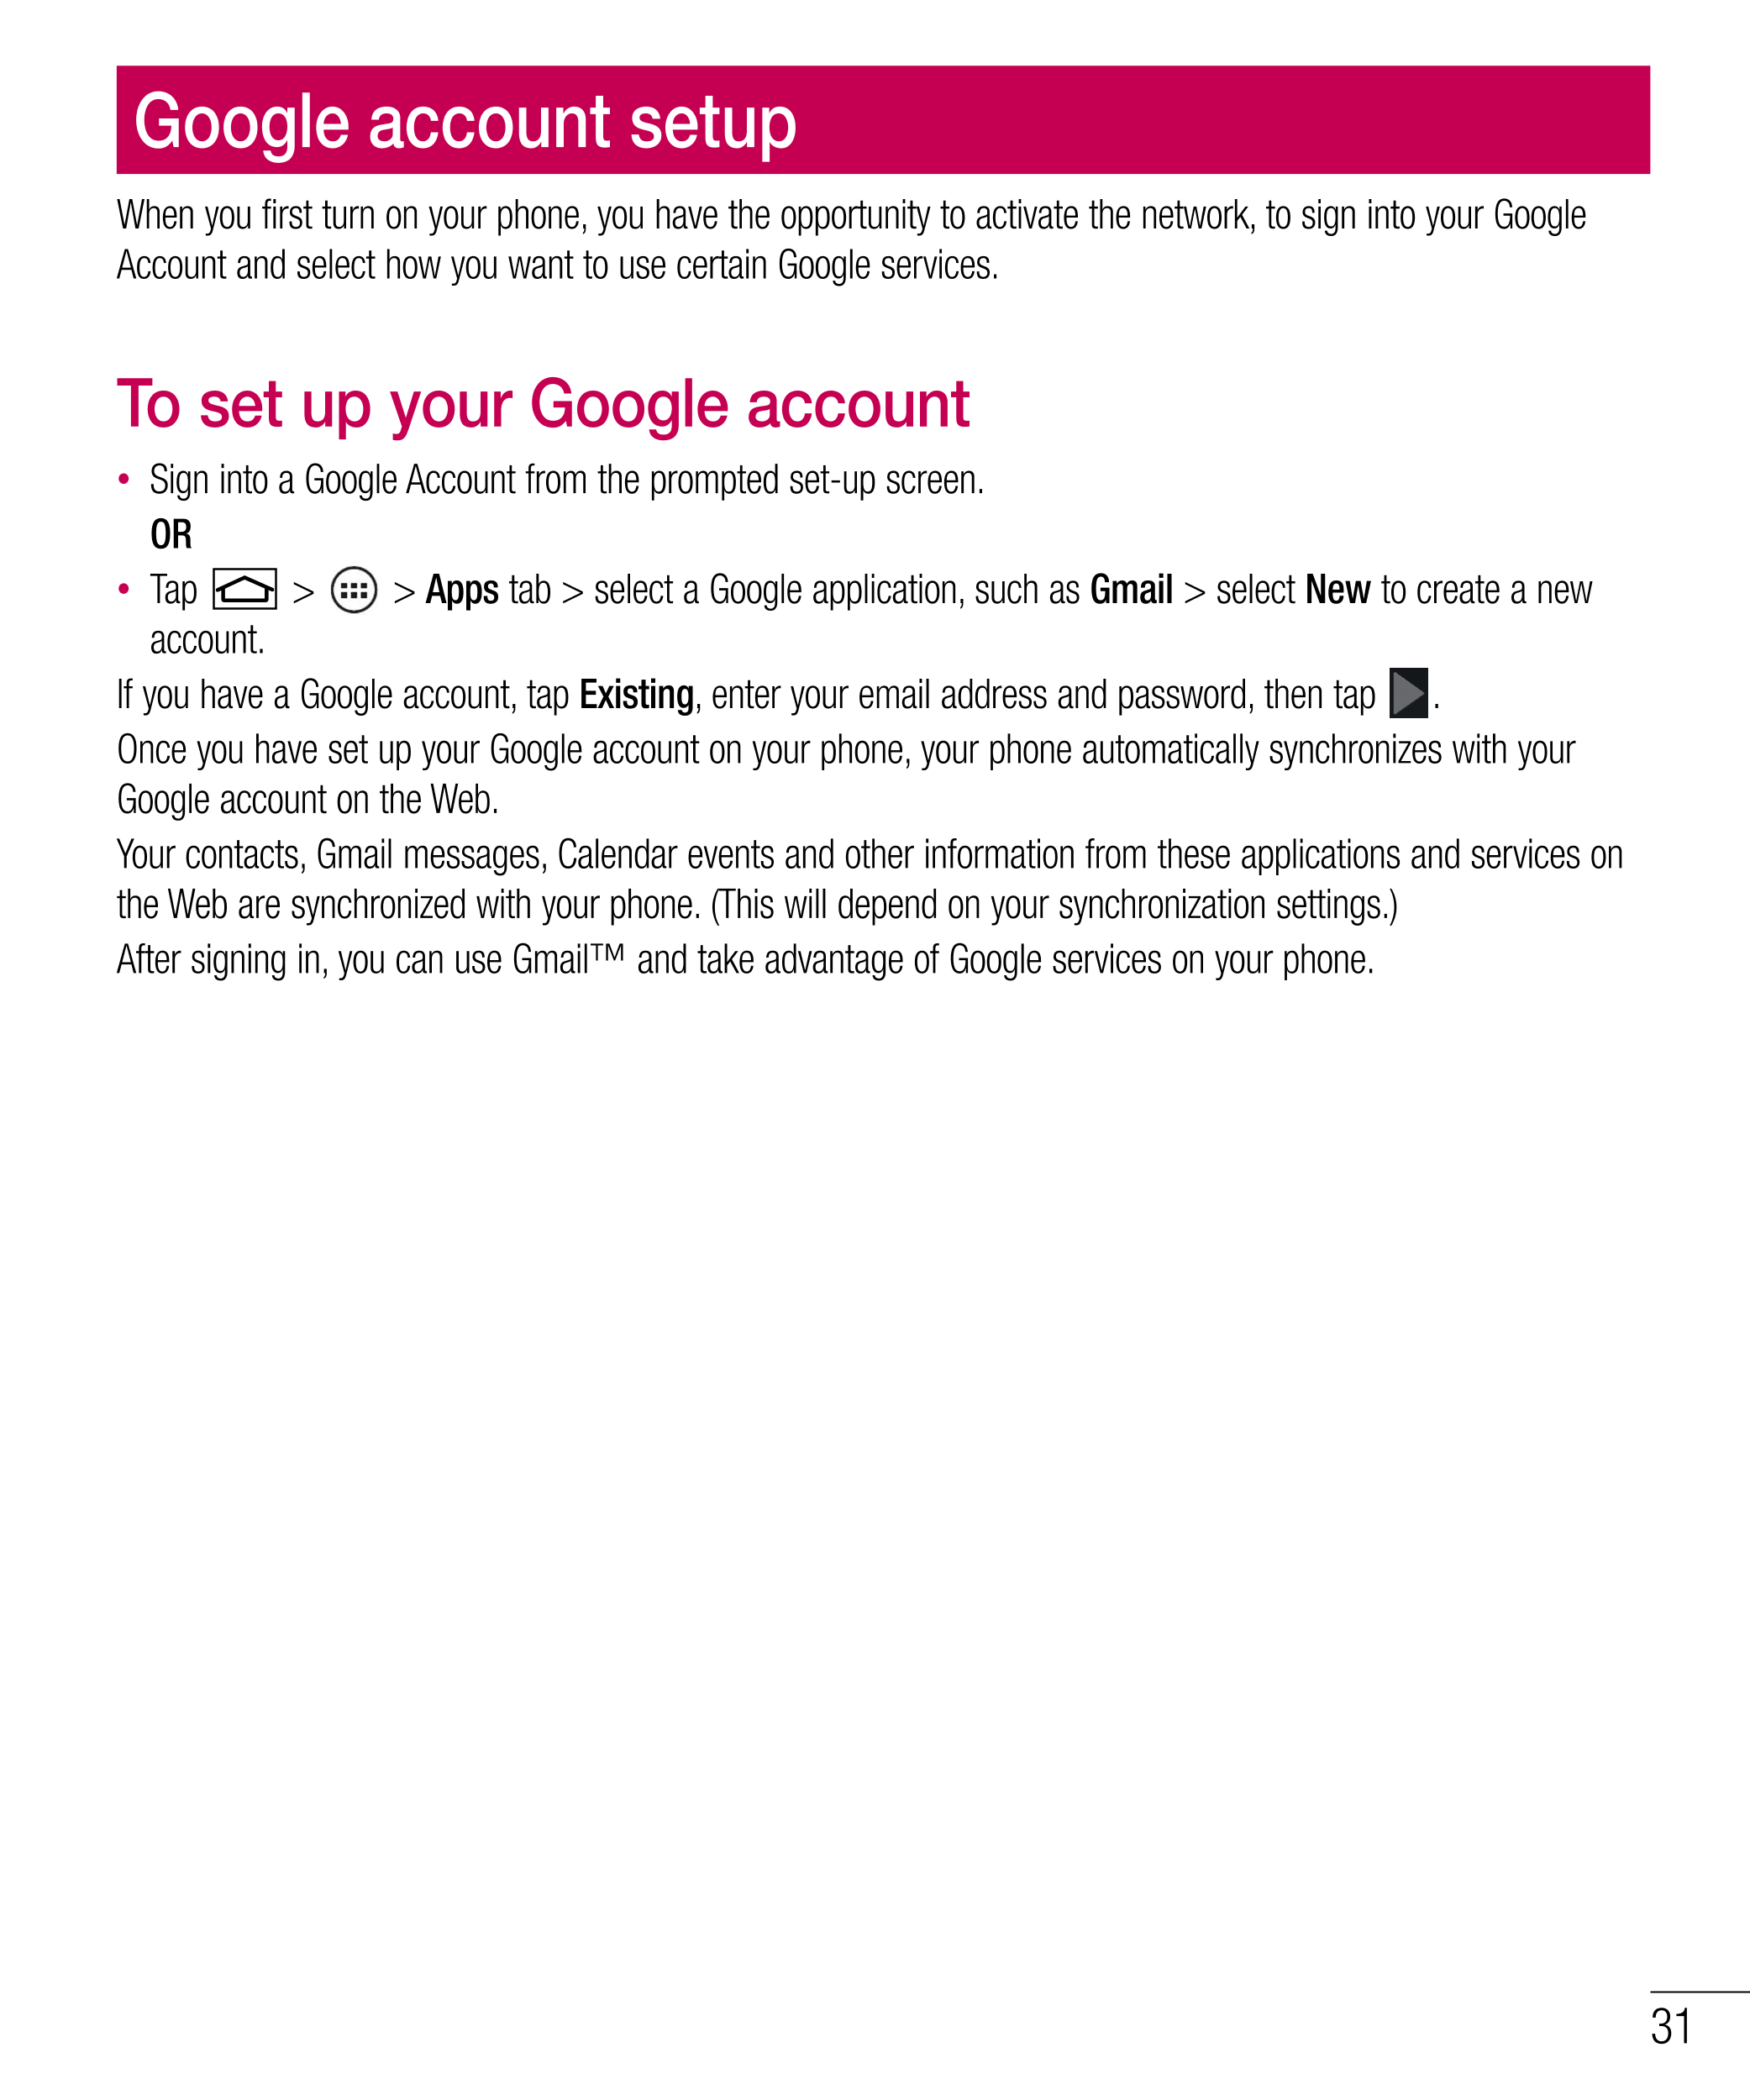 Google account setup
When you first turn on your phone, you have the opportunity to activate the network, to sign into your Goog